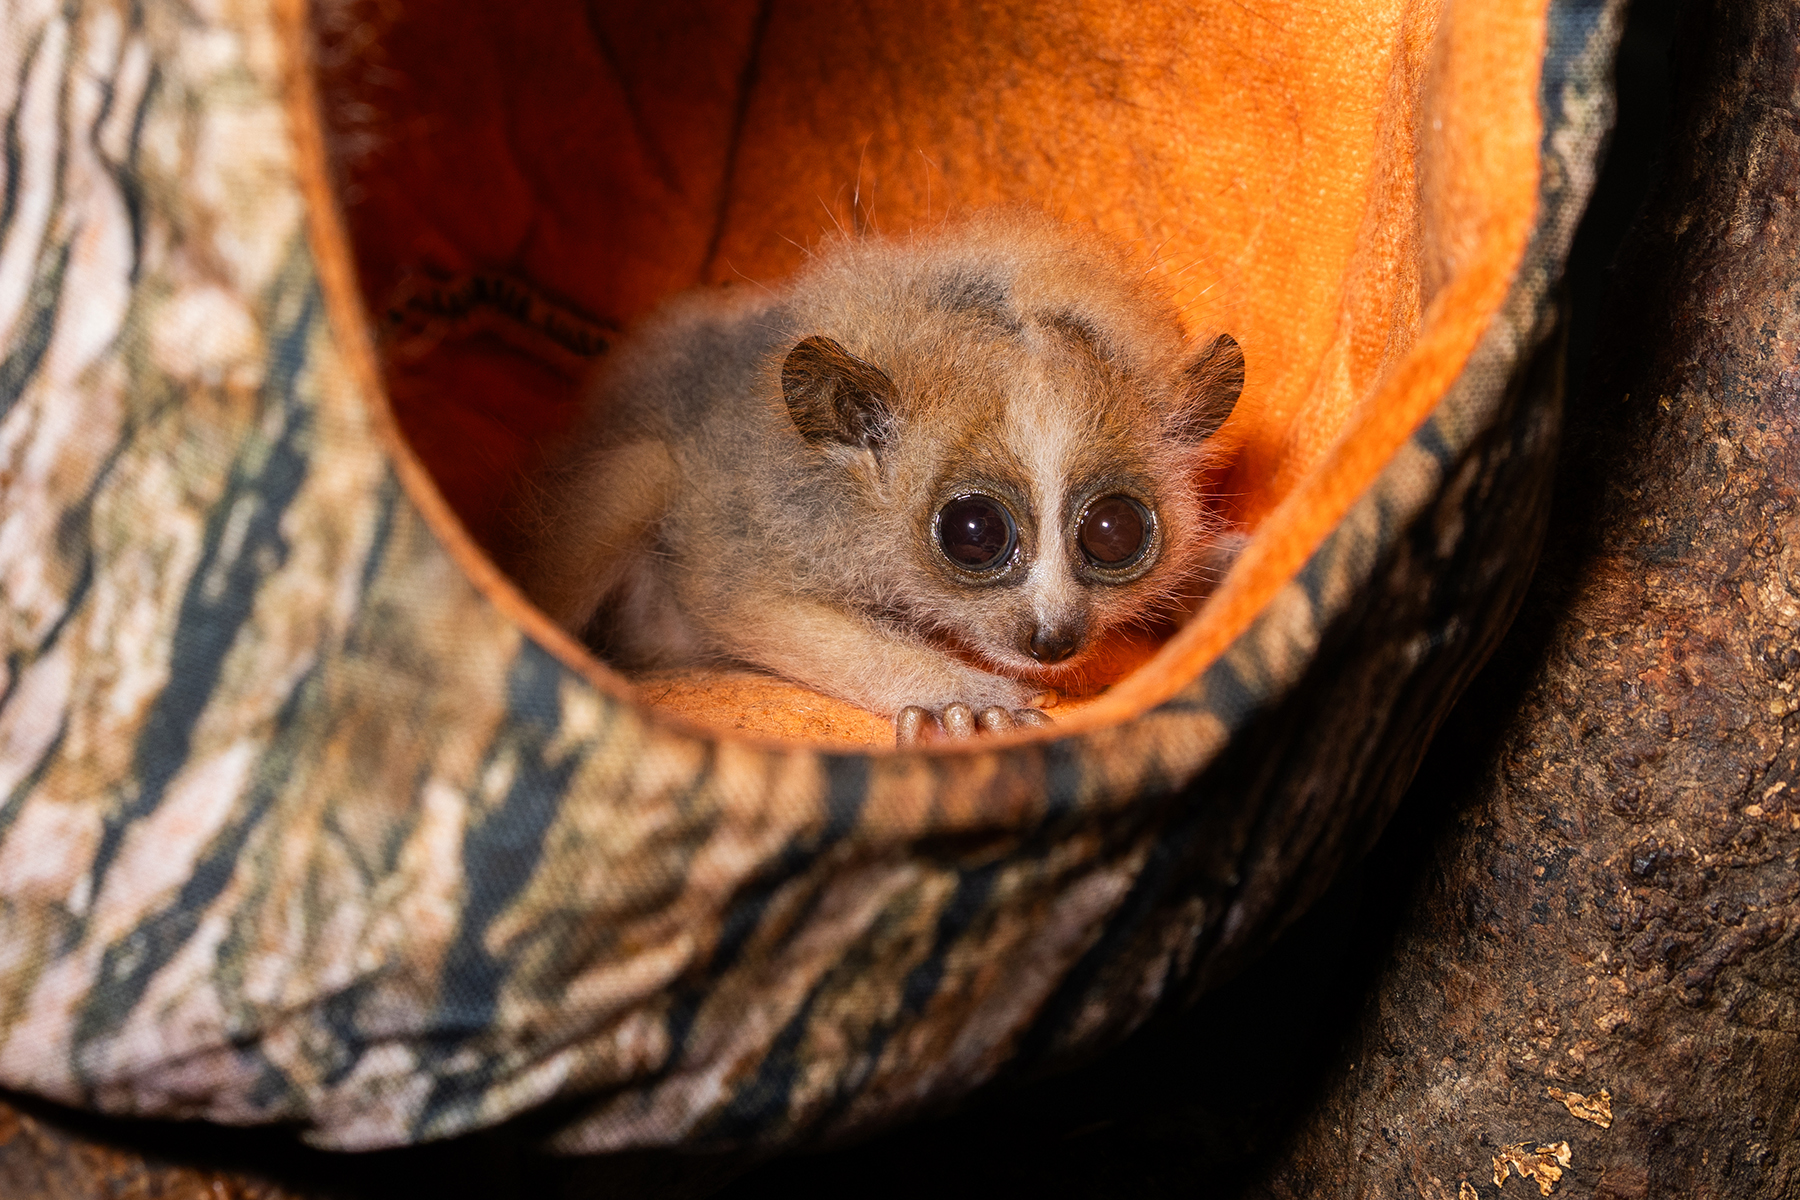 A baby pygmy slow loris rests in its hammock, peeking out into the exhibit.